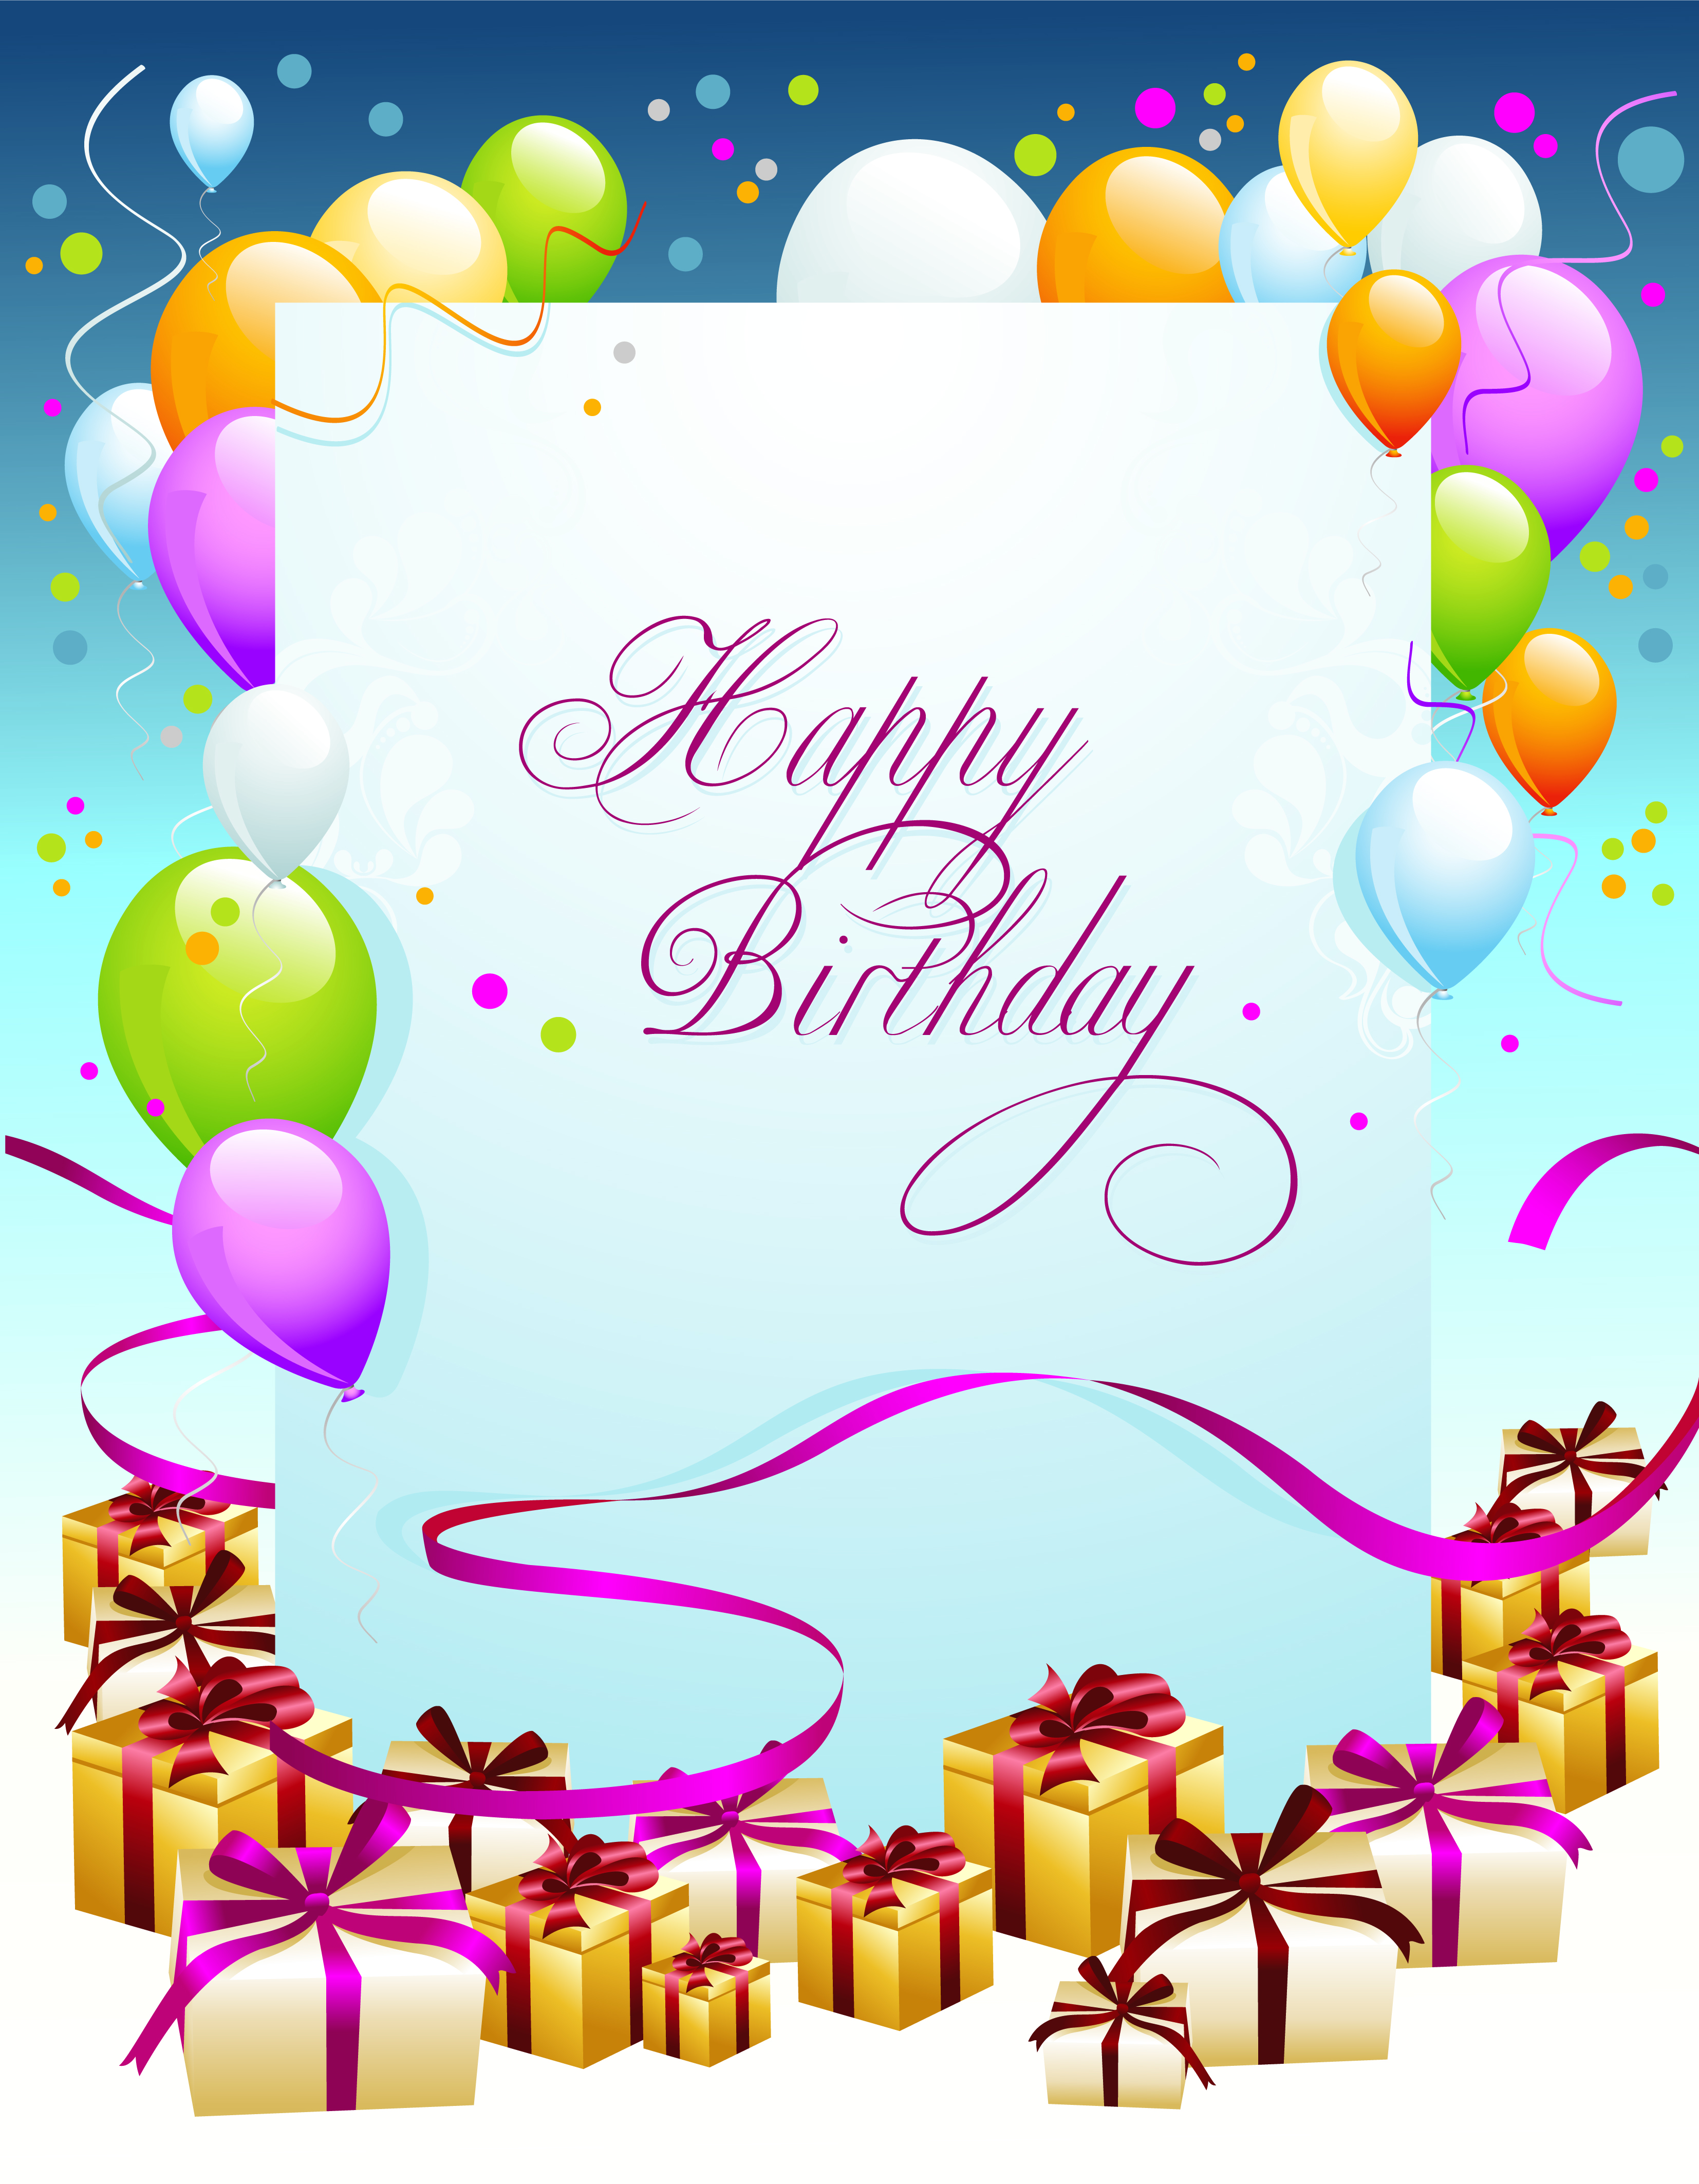 clipart birthday backgrounds free - photo #24